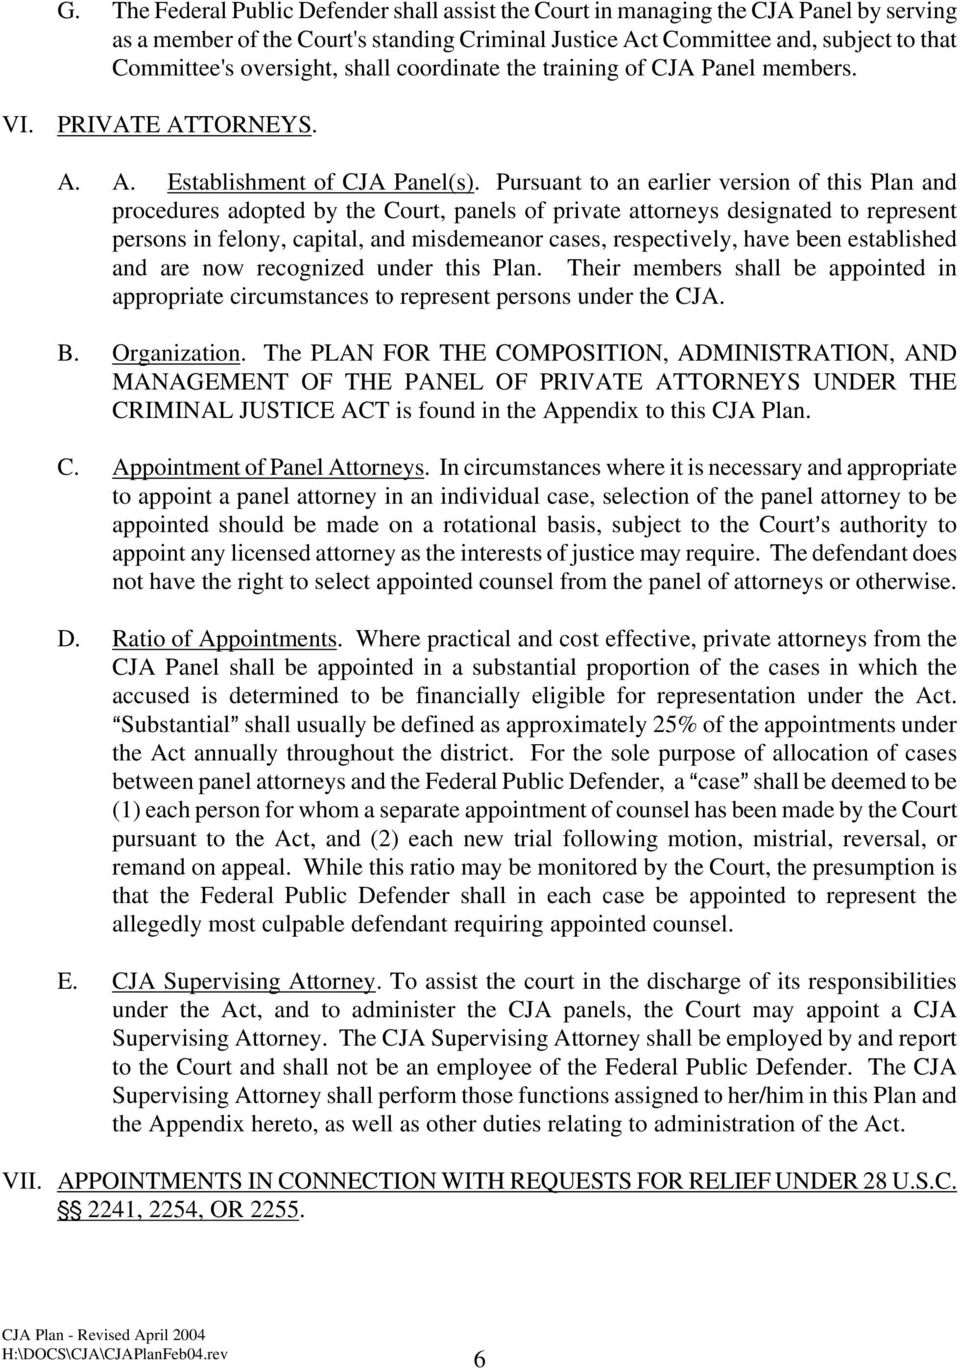 Pursuant to an earlier version of this Plan and procedures adopted by the Court, panels of private attorneys designated to represent persons in felony, capital, and misdemeanor cases, respectively,